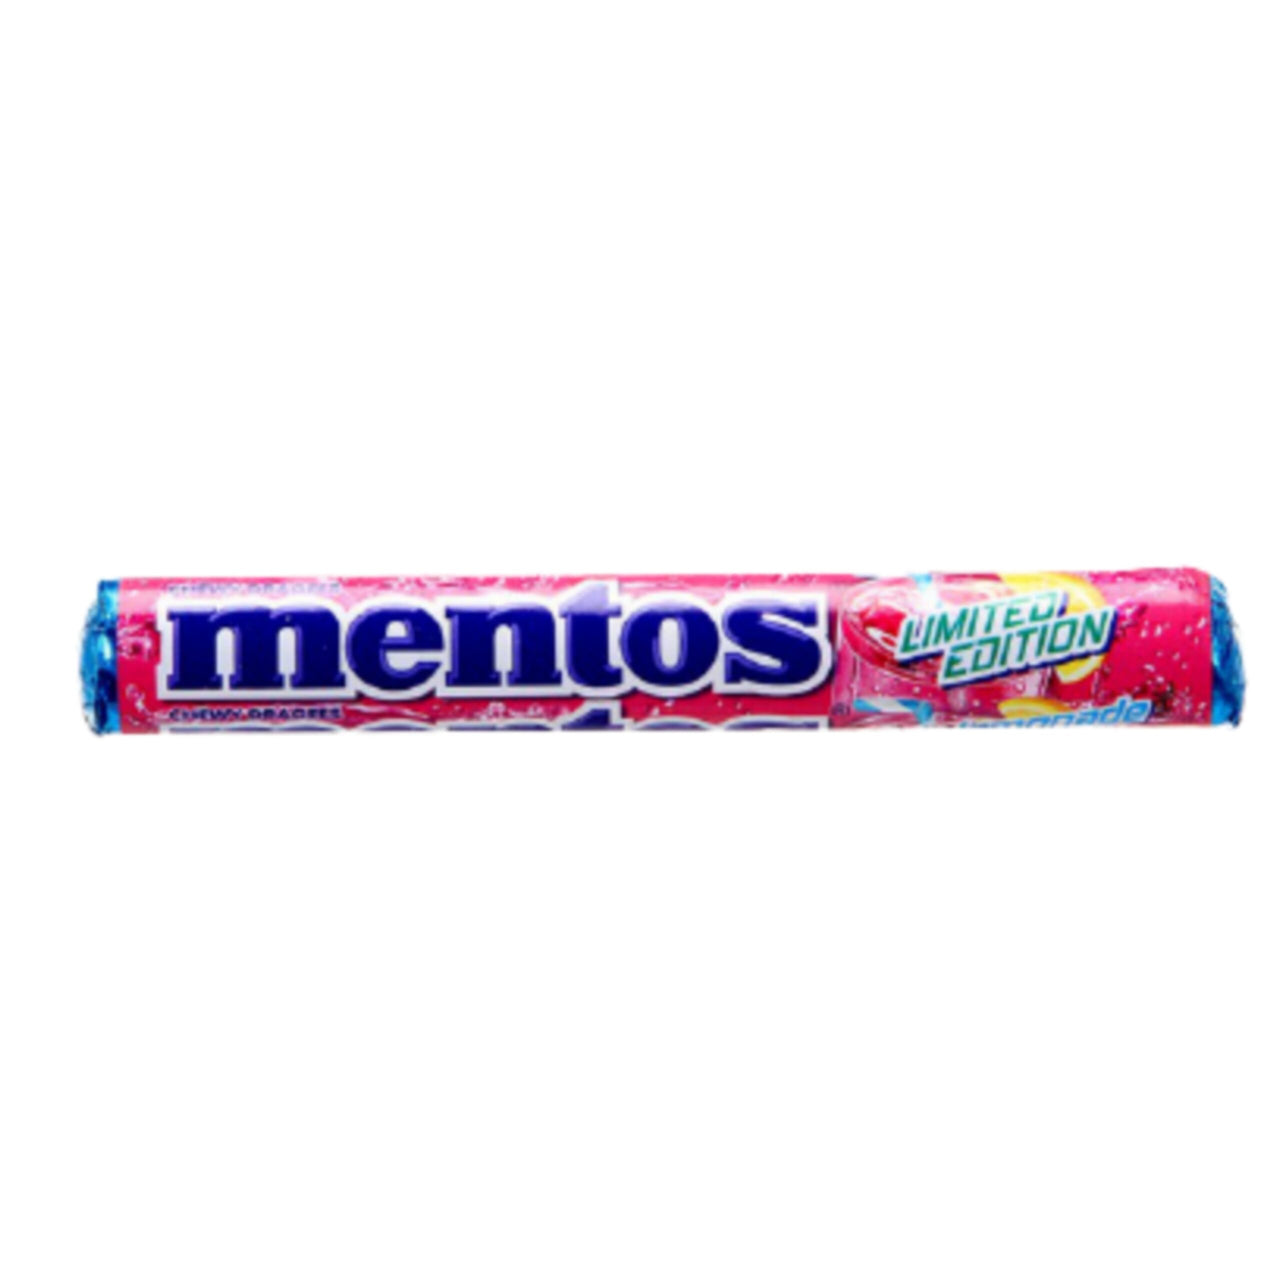 Mentos Lets Party Limited Edition (Thailand)